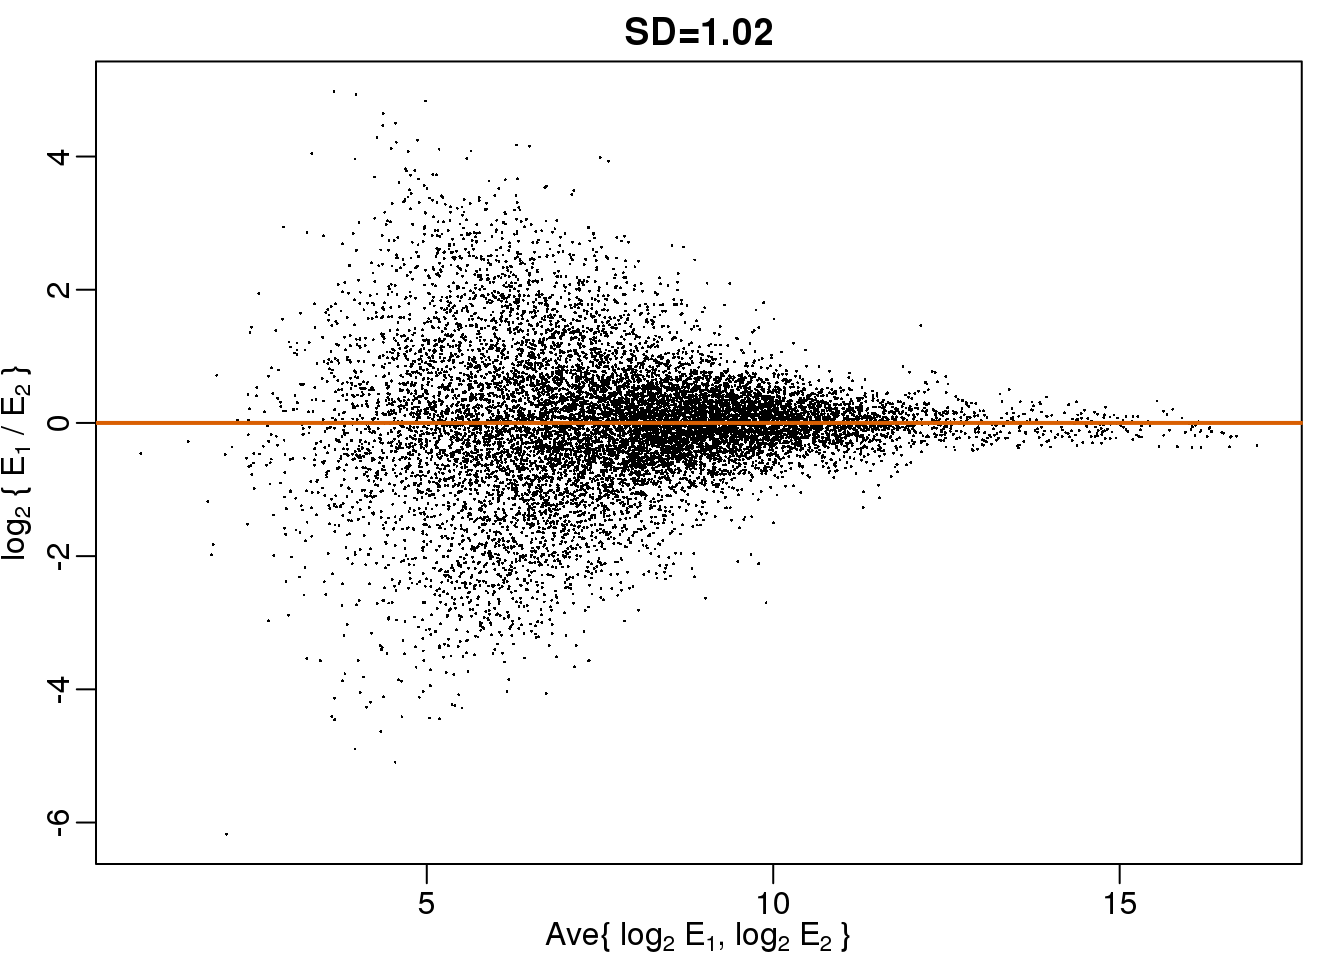 MA plot of the same data shown above shows that data is not replicated very well despite a high correlation.